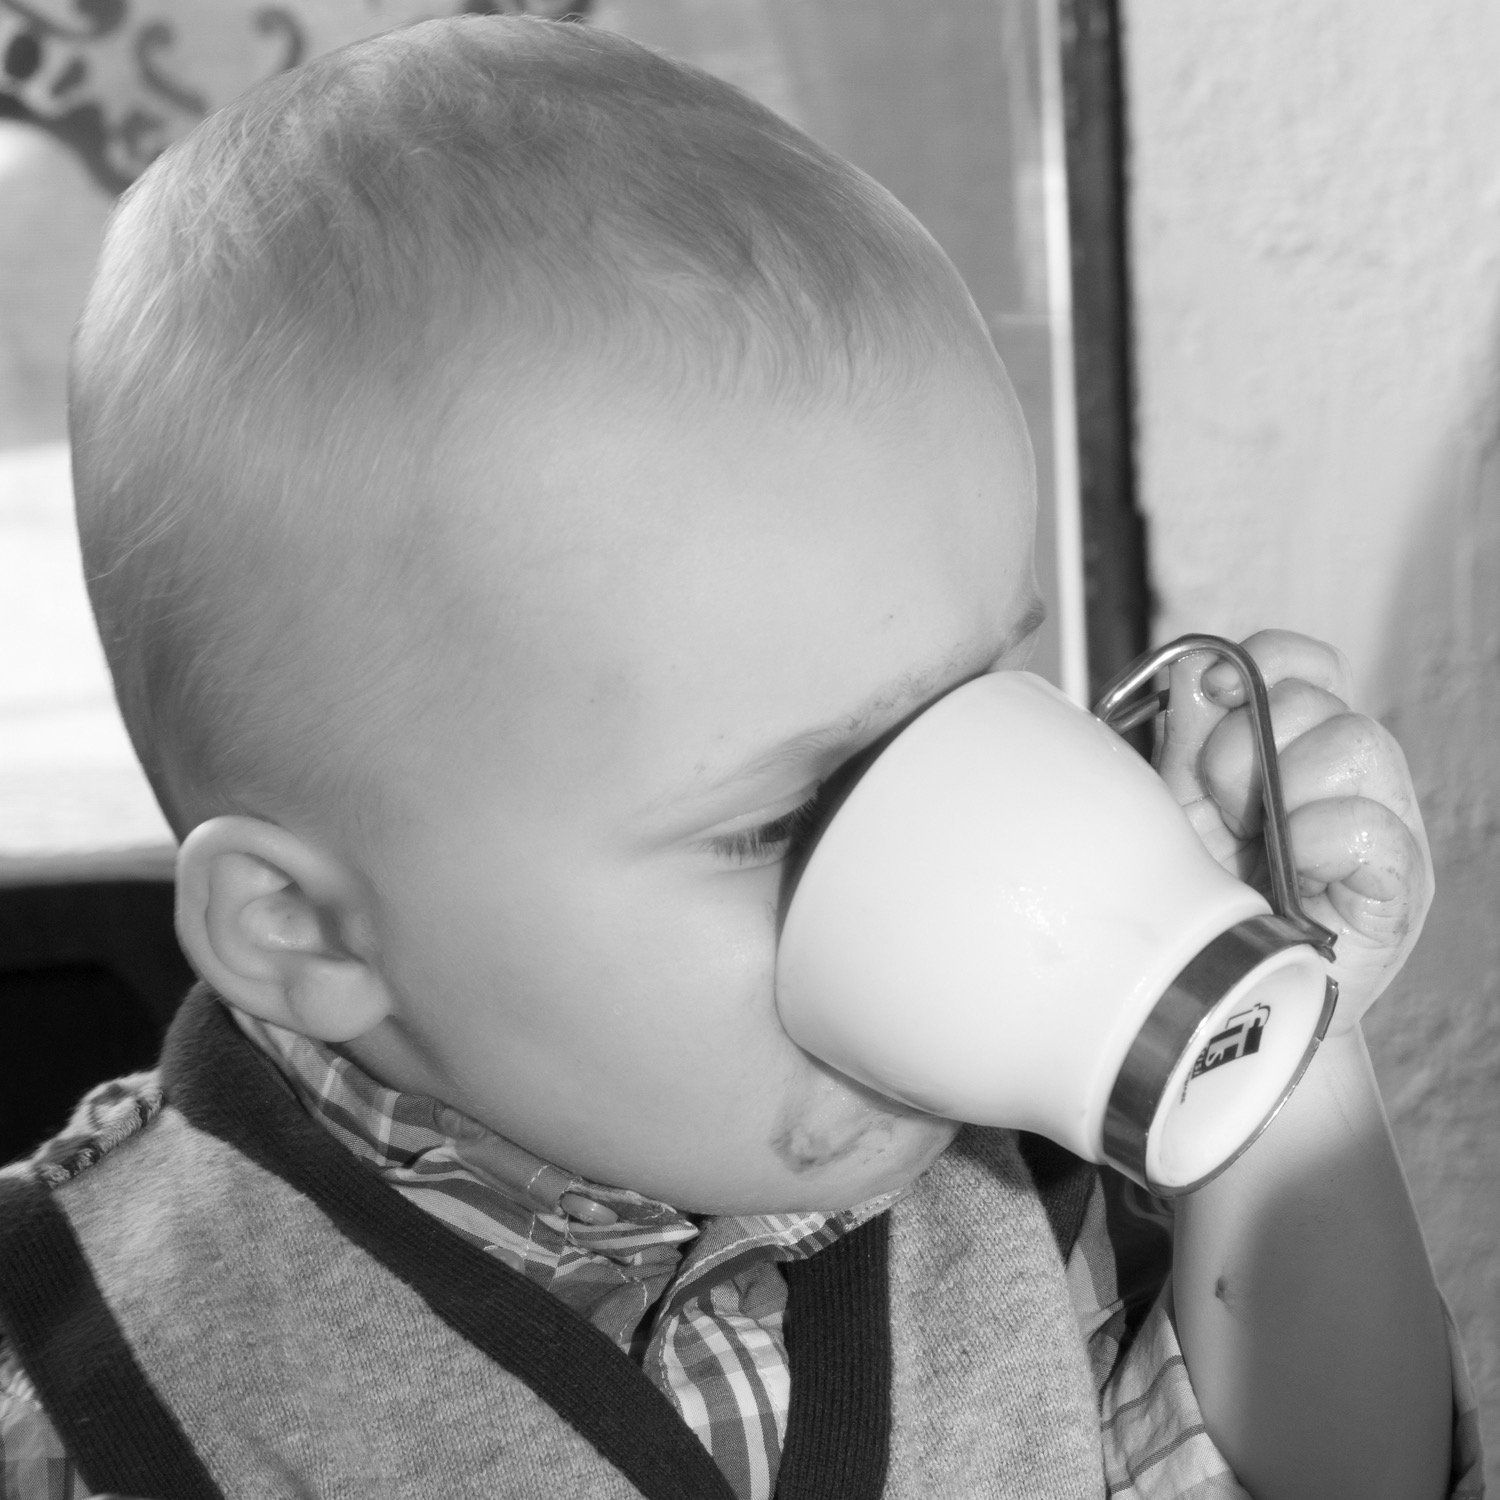 Toddler drinking from cup |  Child photography | Stacey Naglie Toronto